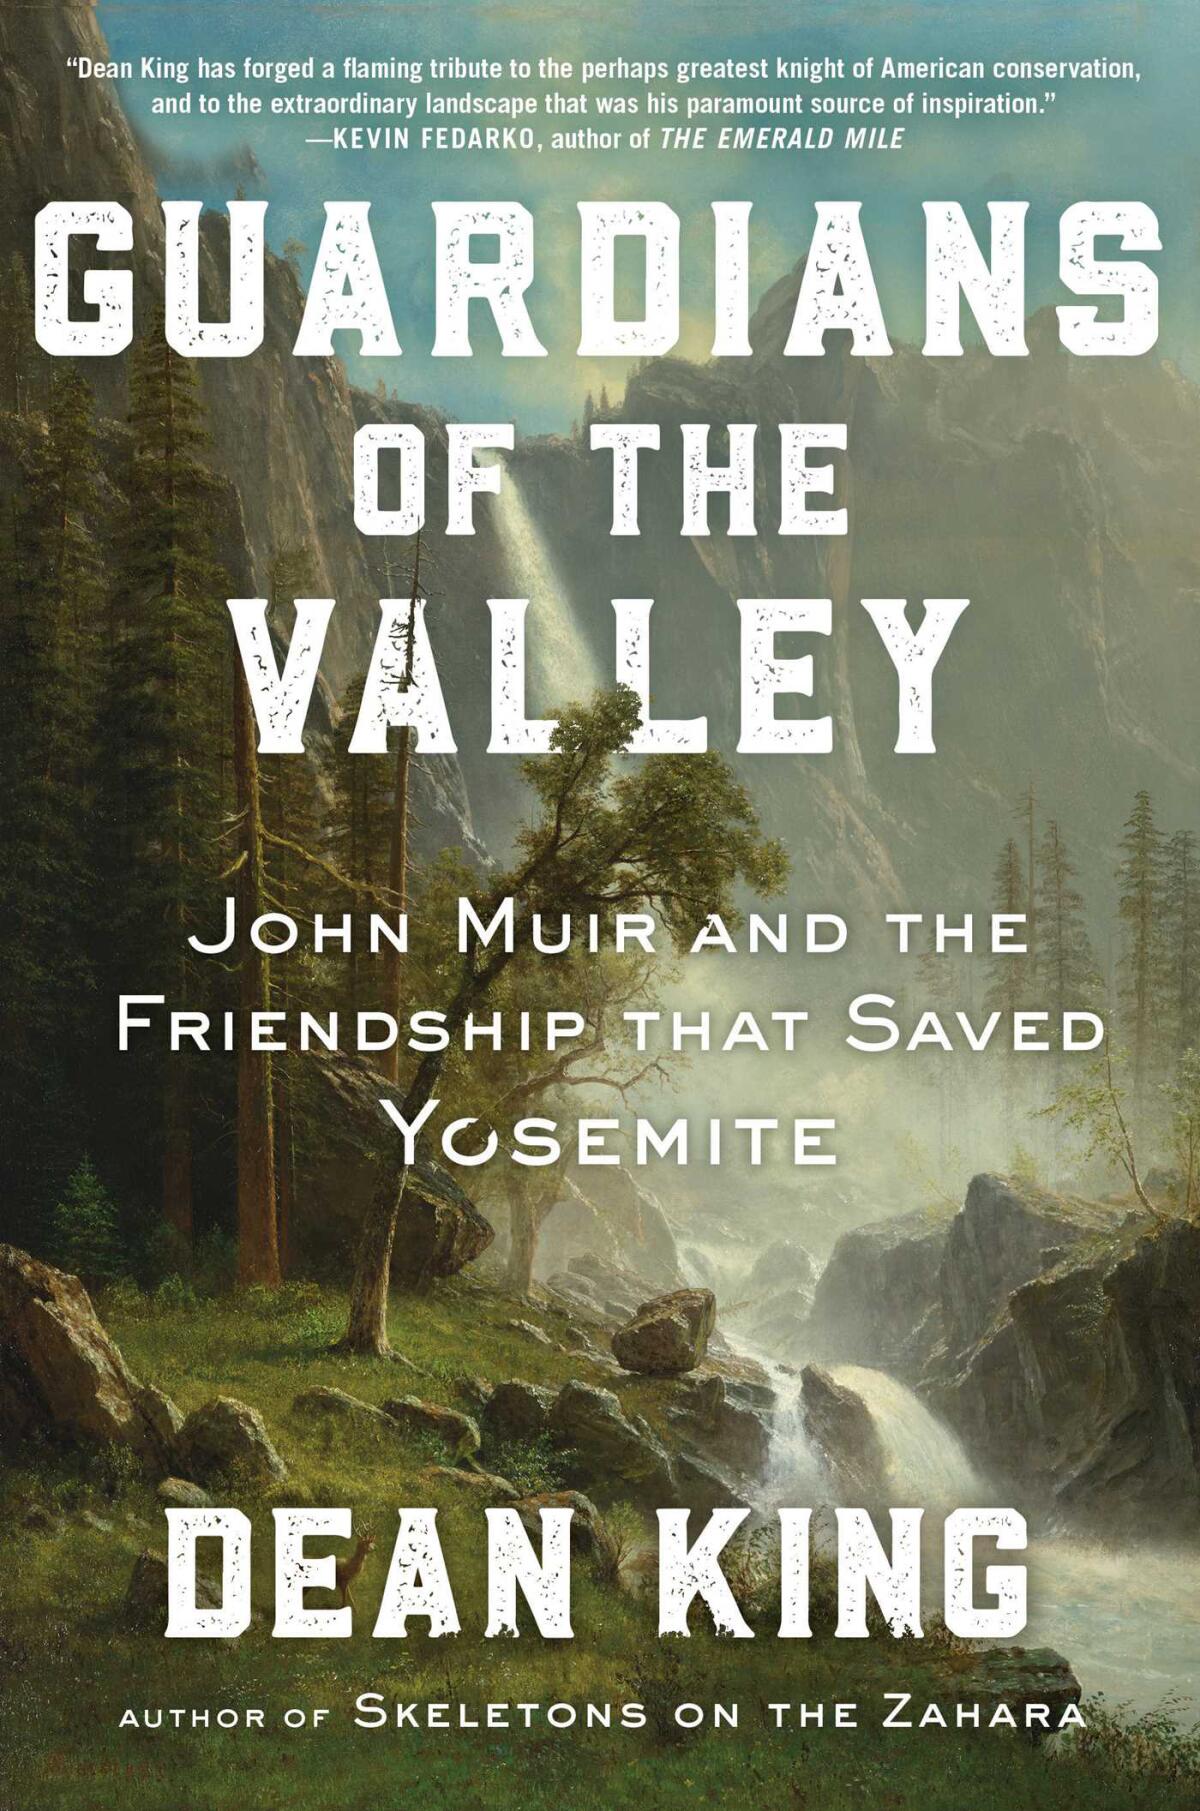 "Guardians of the Valley: John Muir and the Friendship that Saved Yosemite" by Dean King